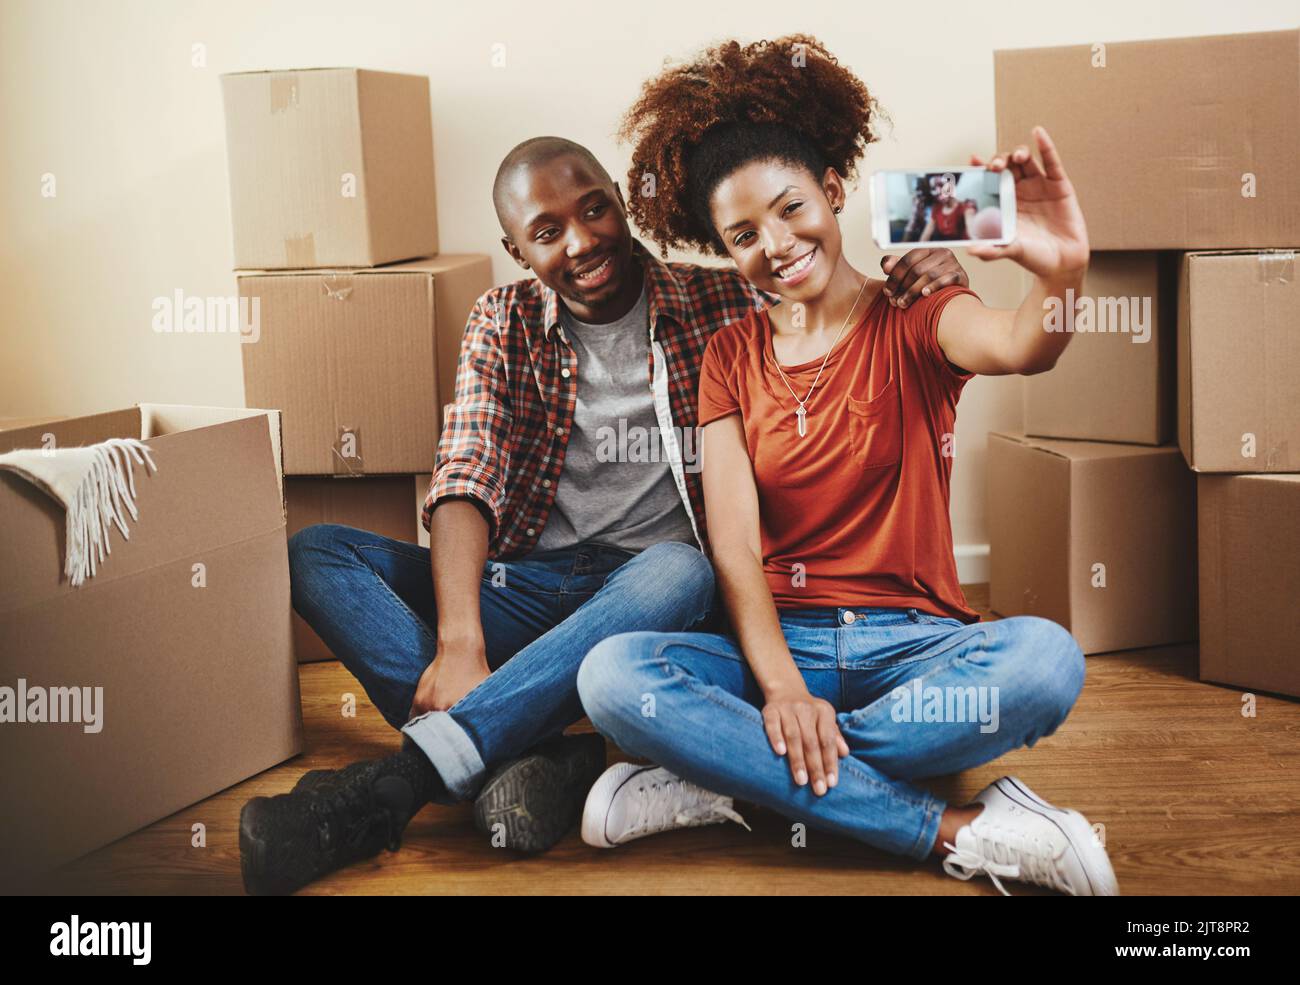 Moving in together is a momentous part of any relationship. a young couple taking a selfie in their new home. Stock Photo